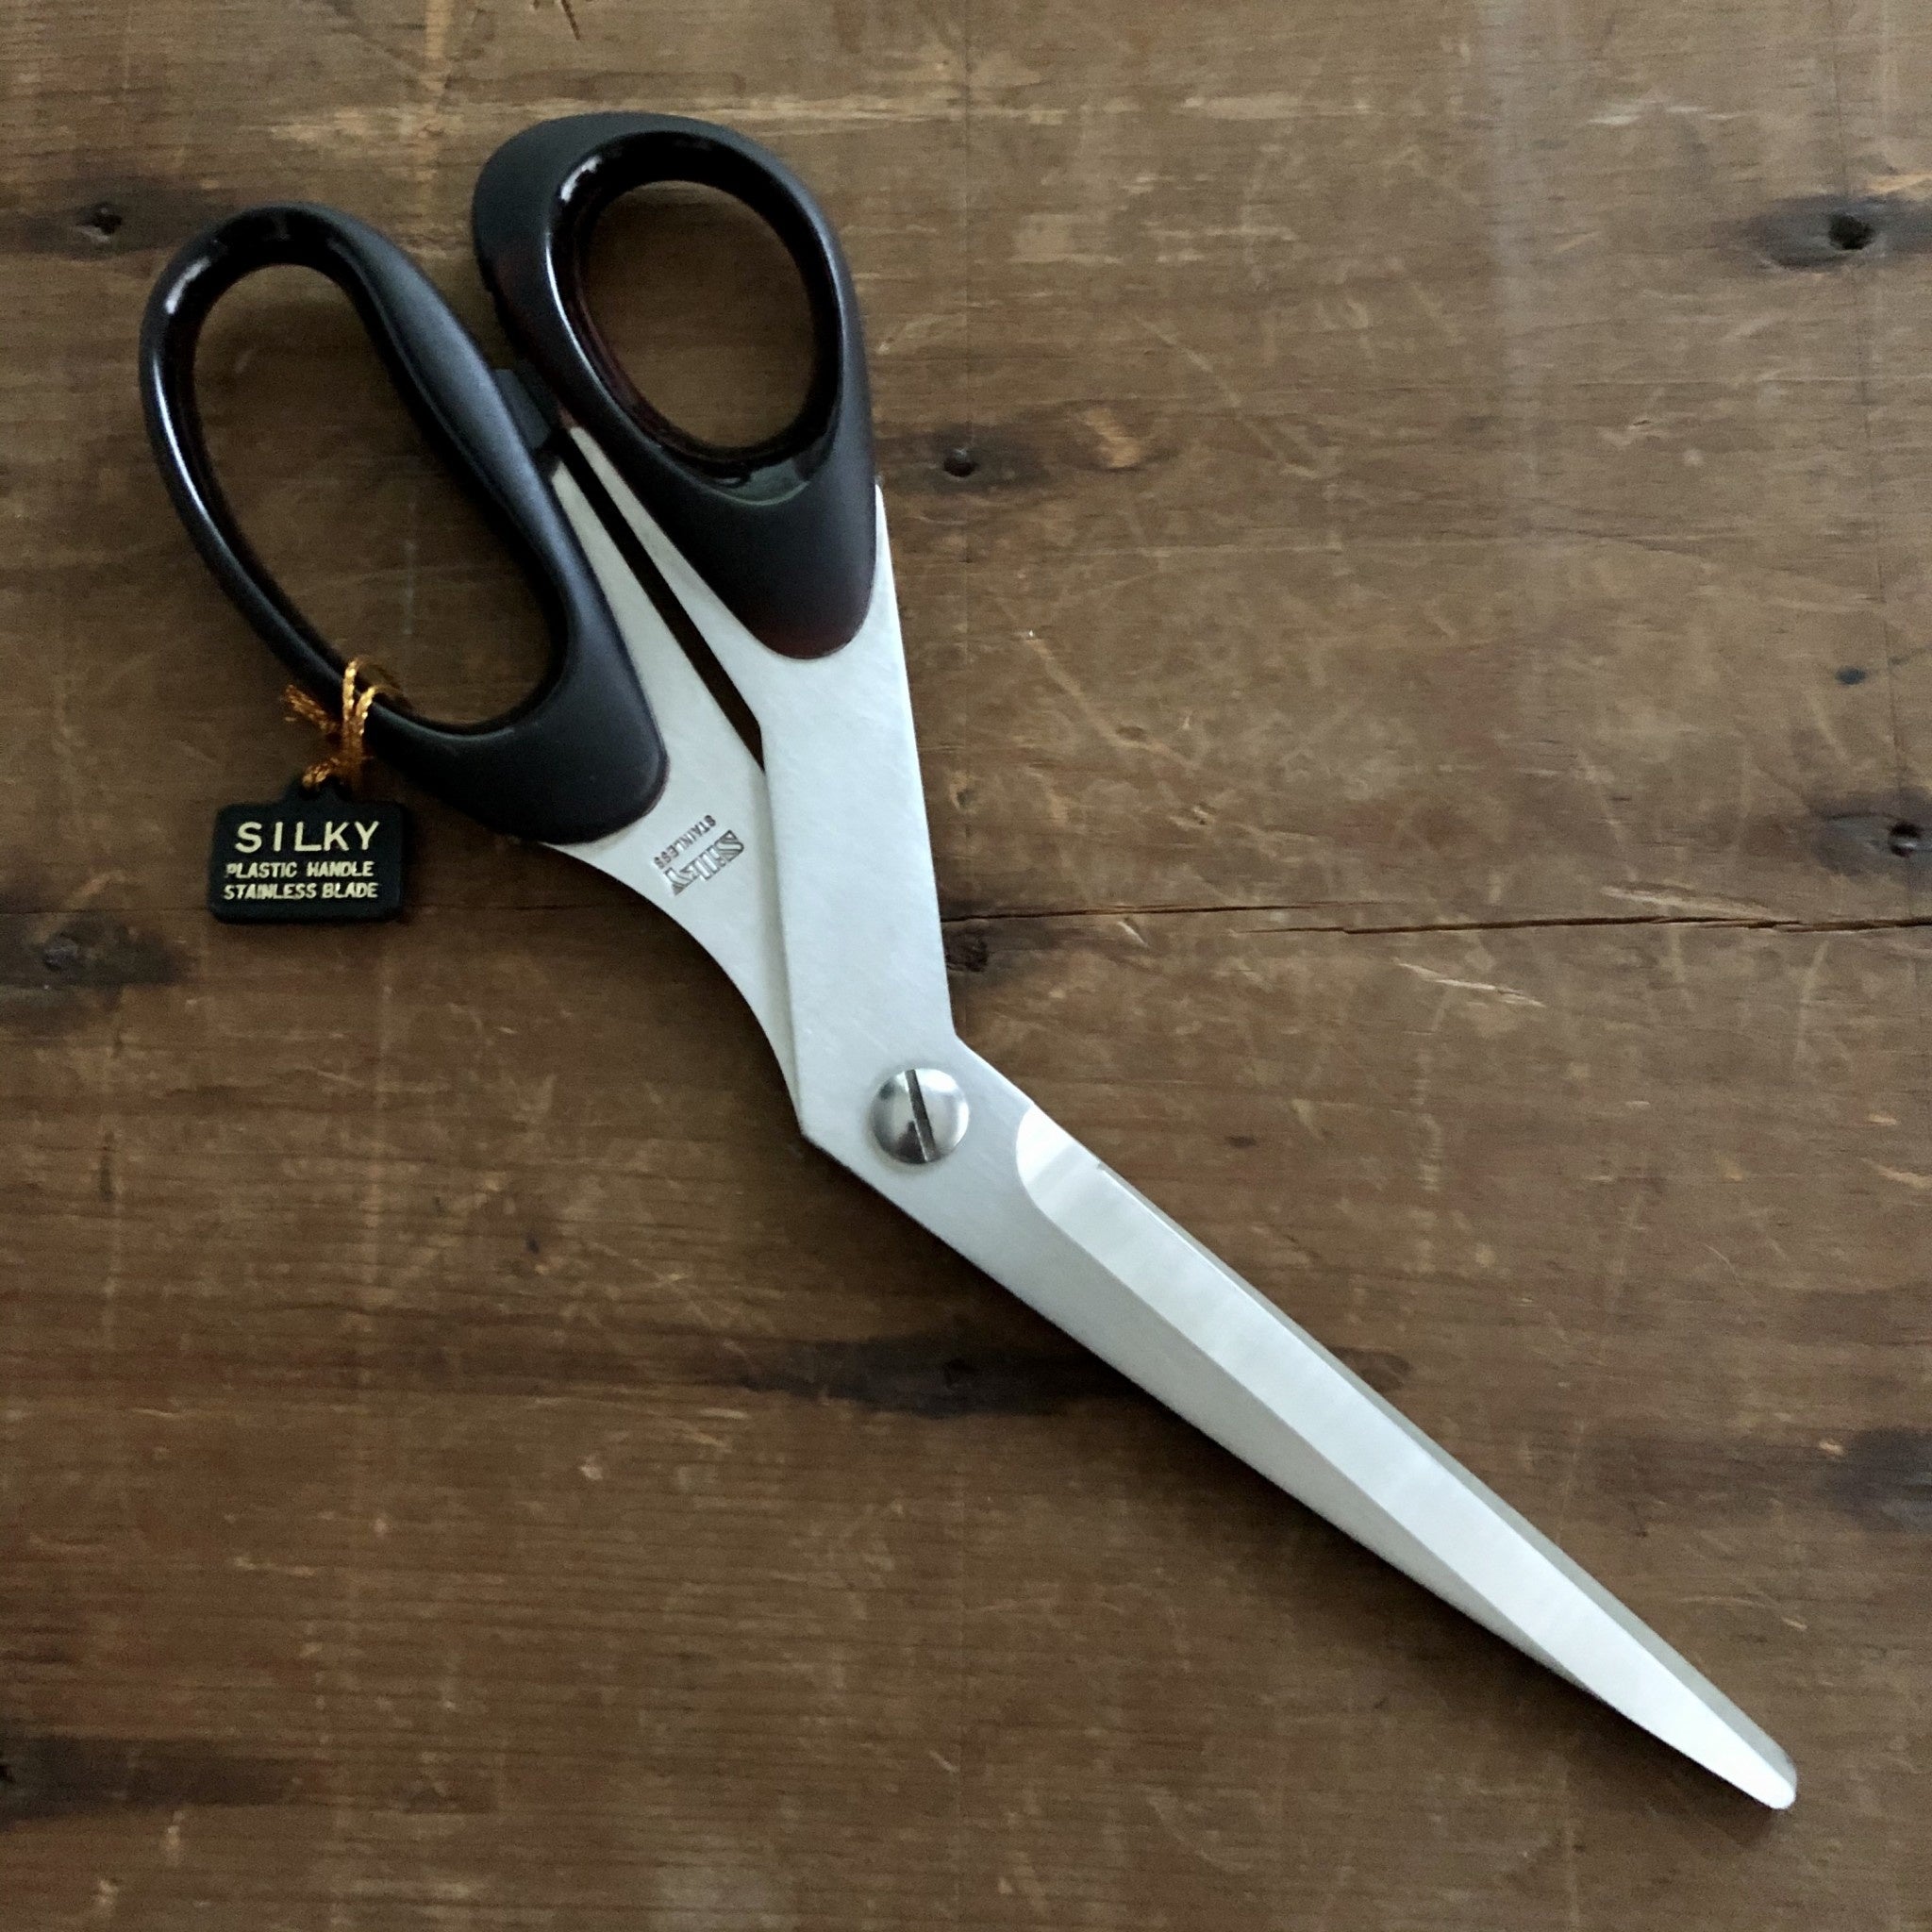 Silky All-Purpose Stainless Steel Scissors with Flexible Handle